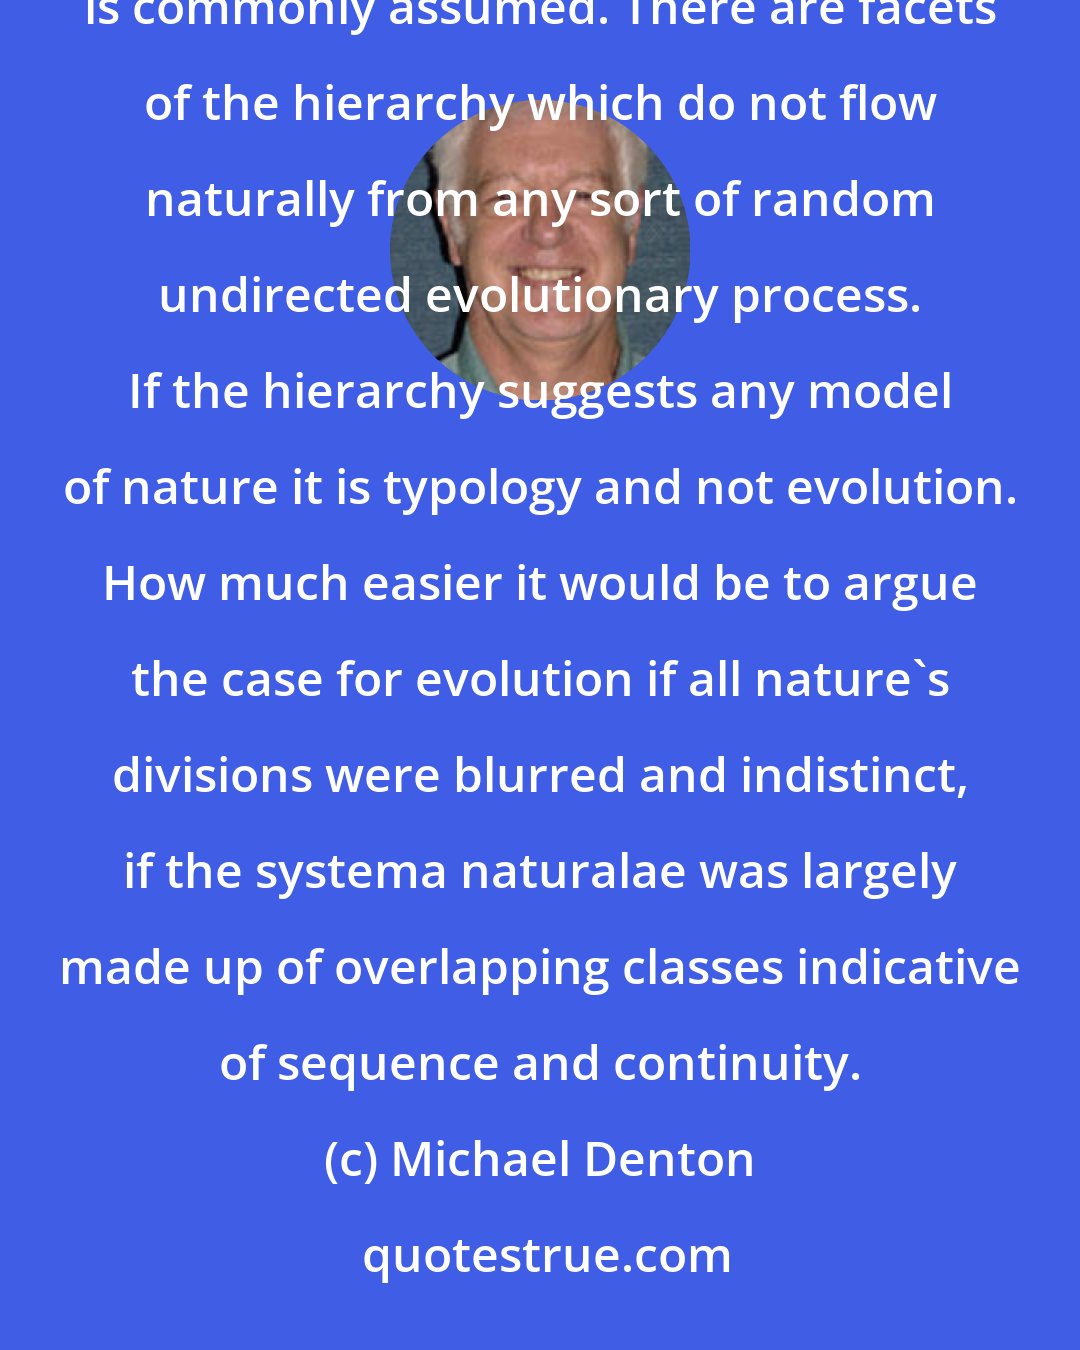 Michael Denton: In the final analysis the hierarchic pattern is nothing like the straightforward witness for organic evolution that is commonly assumed. There are facets of the hierarchy which do not flow naturally from any sort of random undirected evolutionary process. If the hierarchy suggests any model of nature it is typology and not evolution. How much easier it would be to argue the case for evolution if all nature's divisions were blurred and indistinct, if the systema naturalae was largely made up of overlapping classes indicative of sequence and continuity.